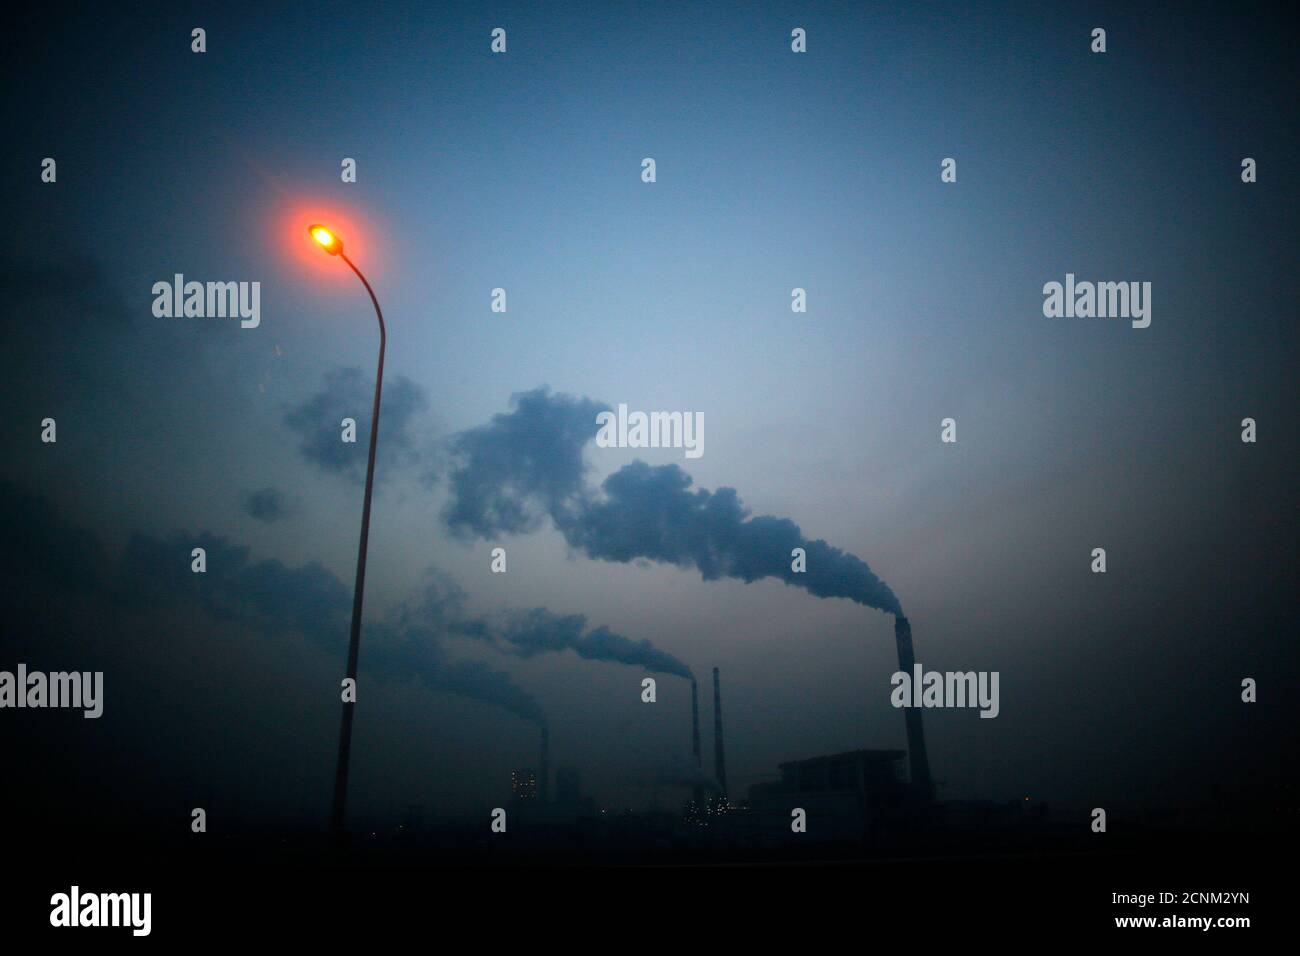 Smoke rises from chimneys of a thermal power plant near Shanghai March 26, 2014. China's energy-hungry, high-polluting industries continued to grow too fast in 2013, putting 'huge pressures' on the environment and causing air quality to worsen, the country's pollution agency said on Tuesday. Premier Li Keqiang 'declared war' on pollution in a major policy address this month, but China has long struggled to strike a balance between protecting the environment and keeping up economic growth.   REUTERS/Carlos Barria (CHINA - Tags: BUSINESS ENVIRONMENT SOCIETY POLITICS) Stock Photo